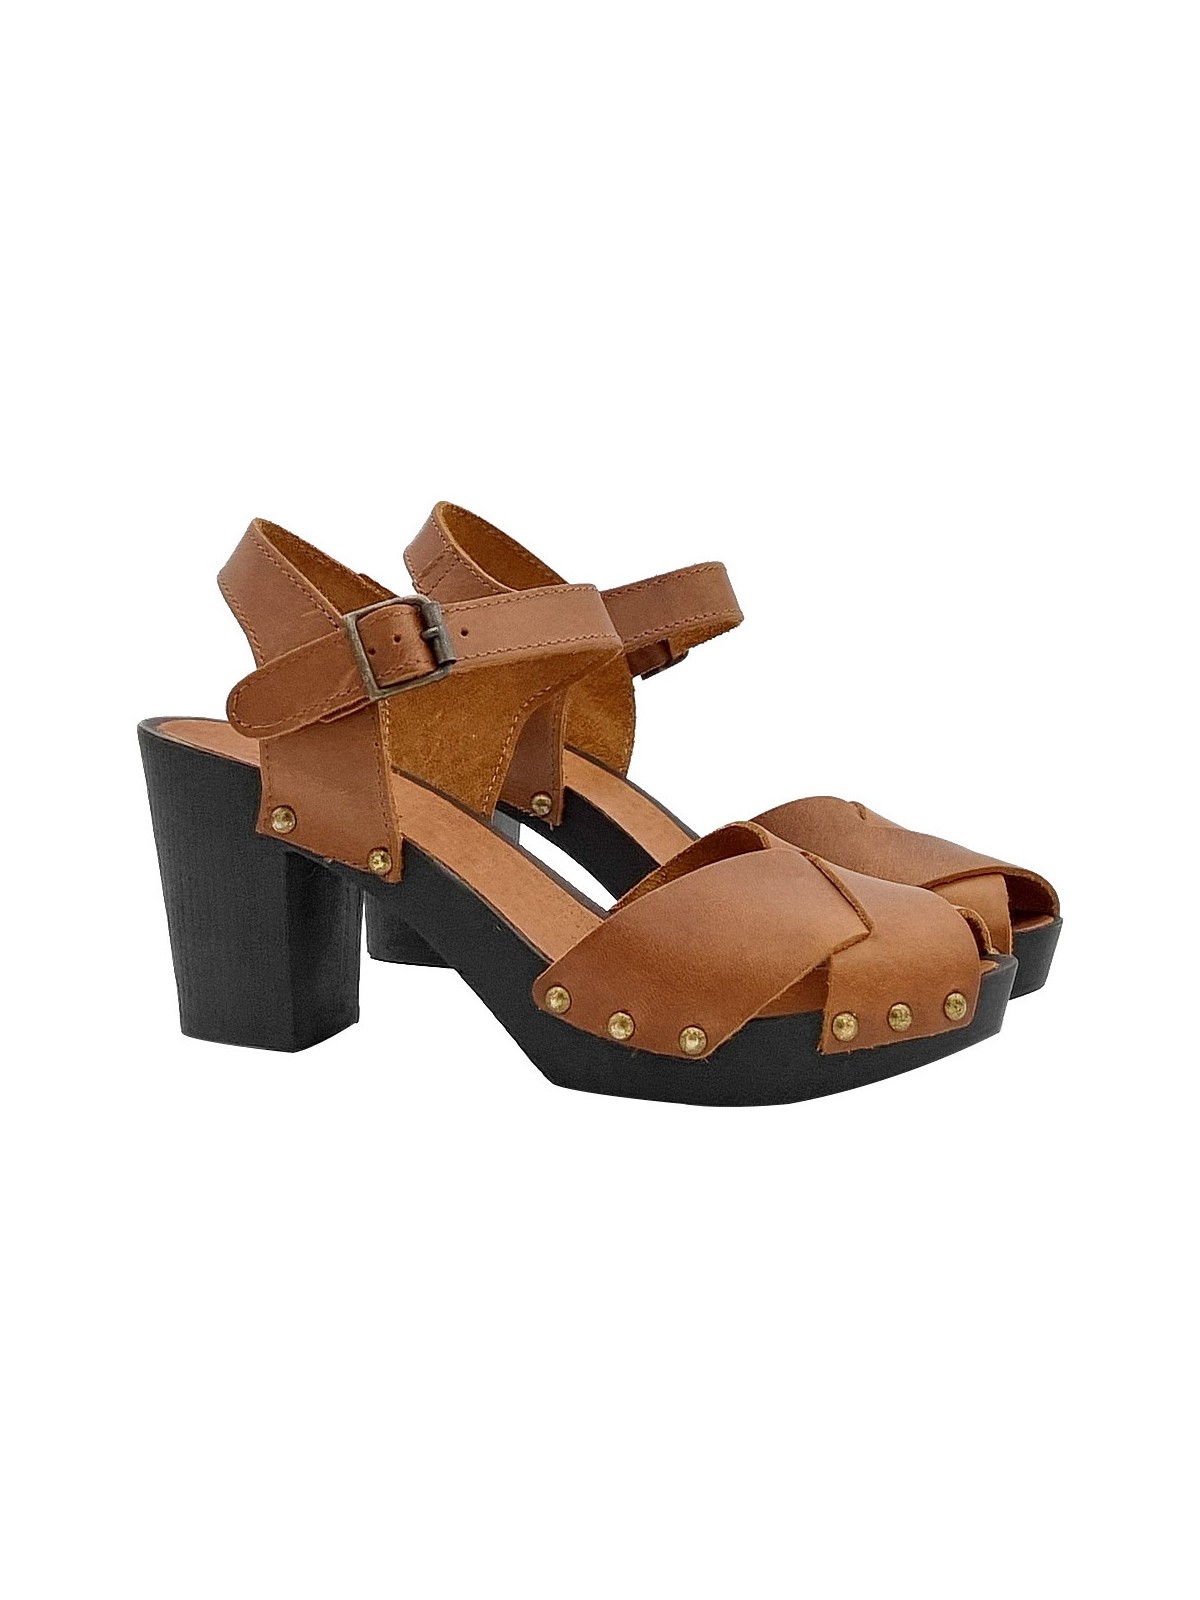 BROWN LEATHER SANDALS WITH STRAP